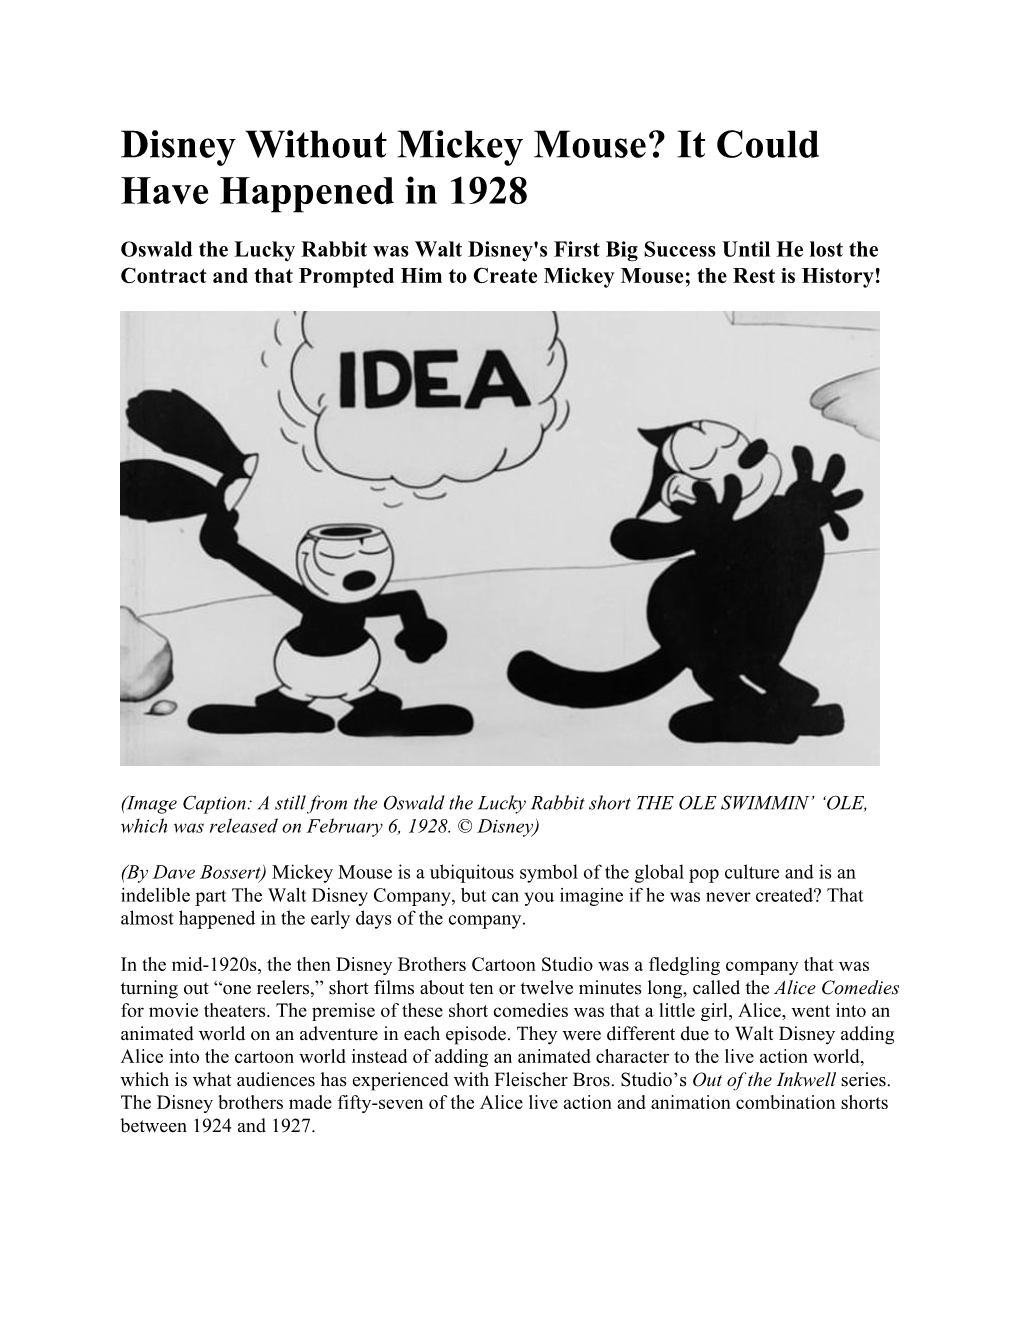 Disney Without Mickey Mouse? It Could Have Happened in 1928